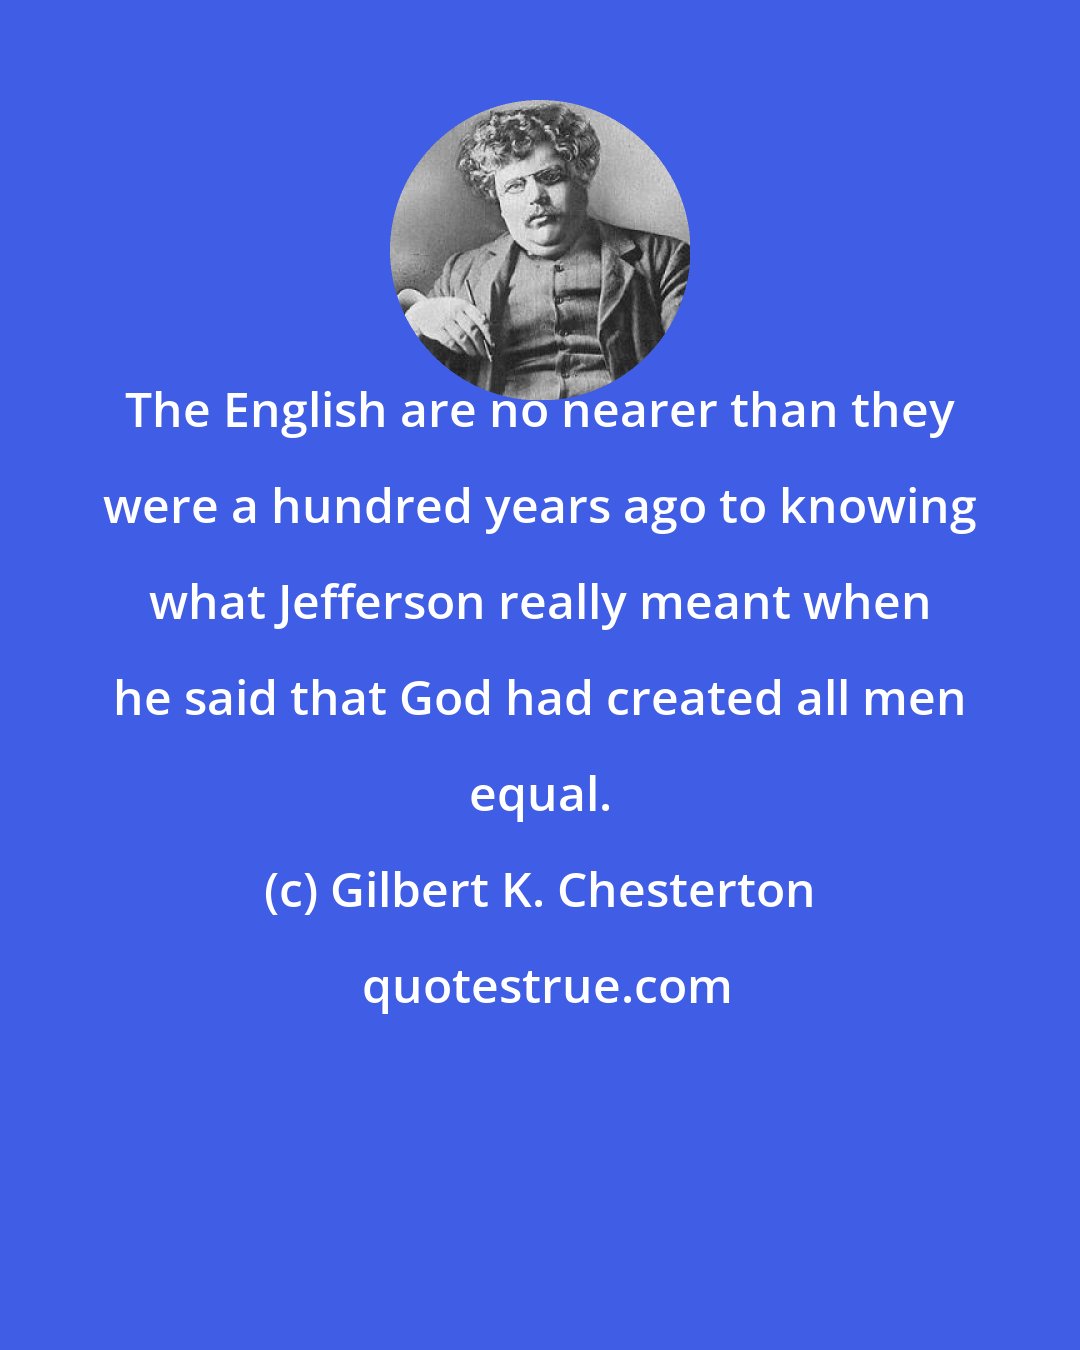 Gilbert K. Chesterton: The English are no nearer than they were a hundred years ago to knowing what Jefferson really meant when he said that God had created all men equal.